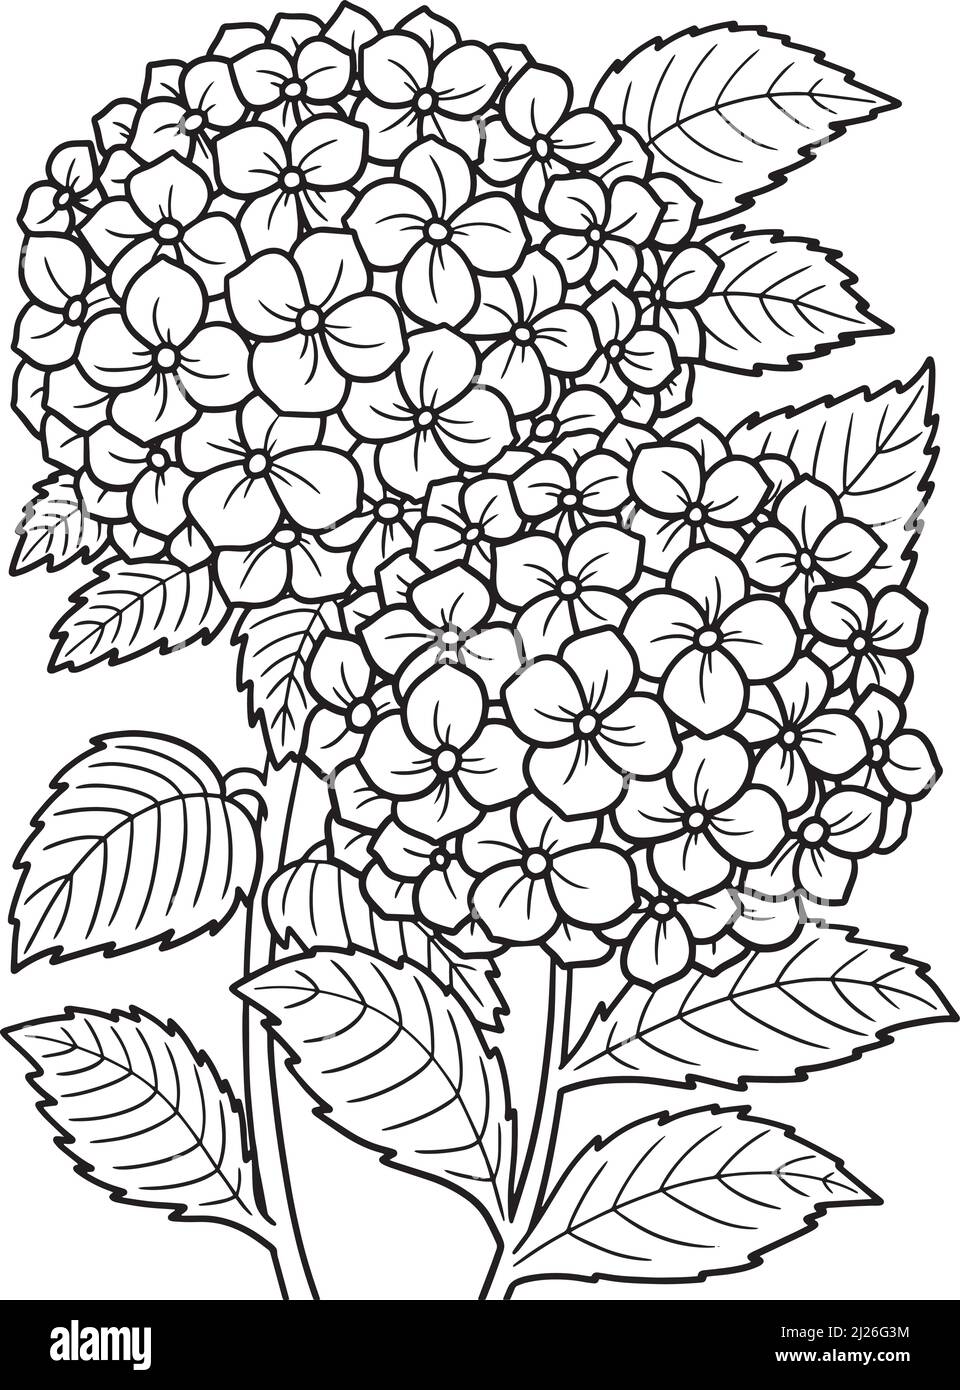 Hydrangea Flower Coloring Page for Adults Stock Vector